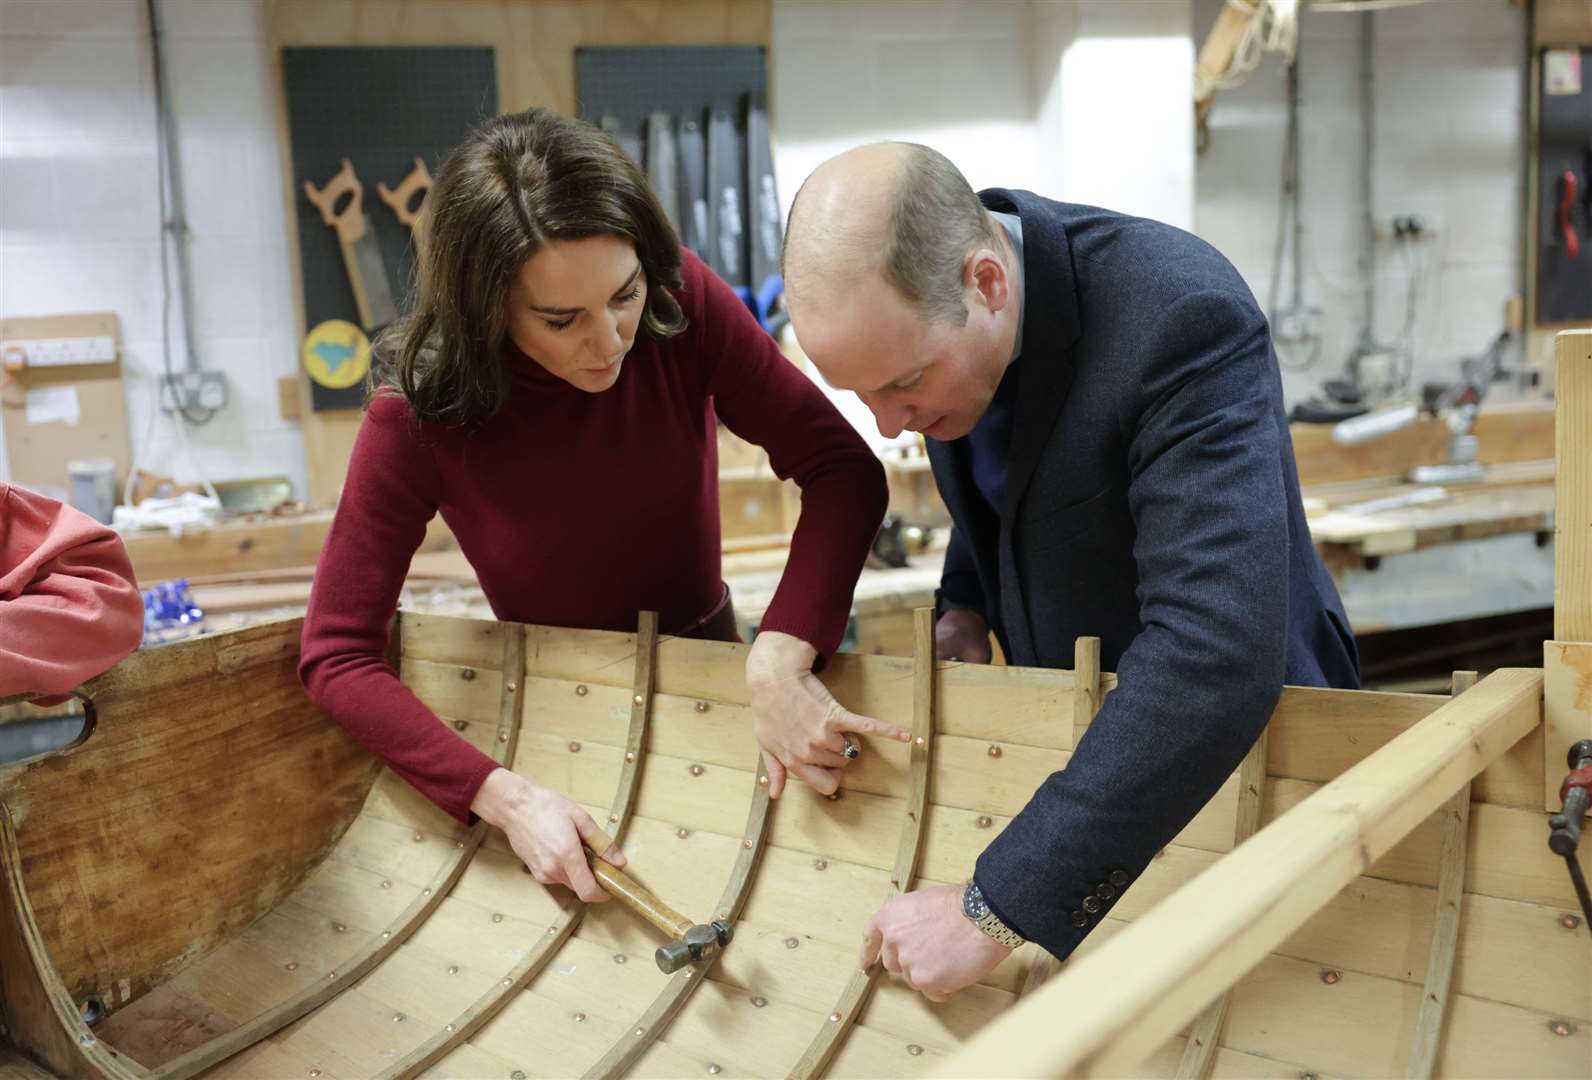 In February the Prince and Princess of Wales, known as the Duke and Duchess of Cornwall while in Cornwall, helped refurbish a boat during a visit to the National Maritime Museum Cornwall in Falmouth (Chris Jackson/PA)